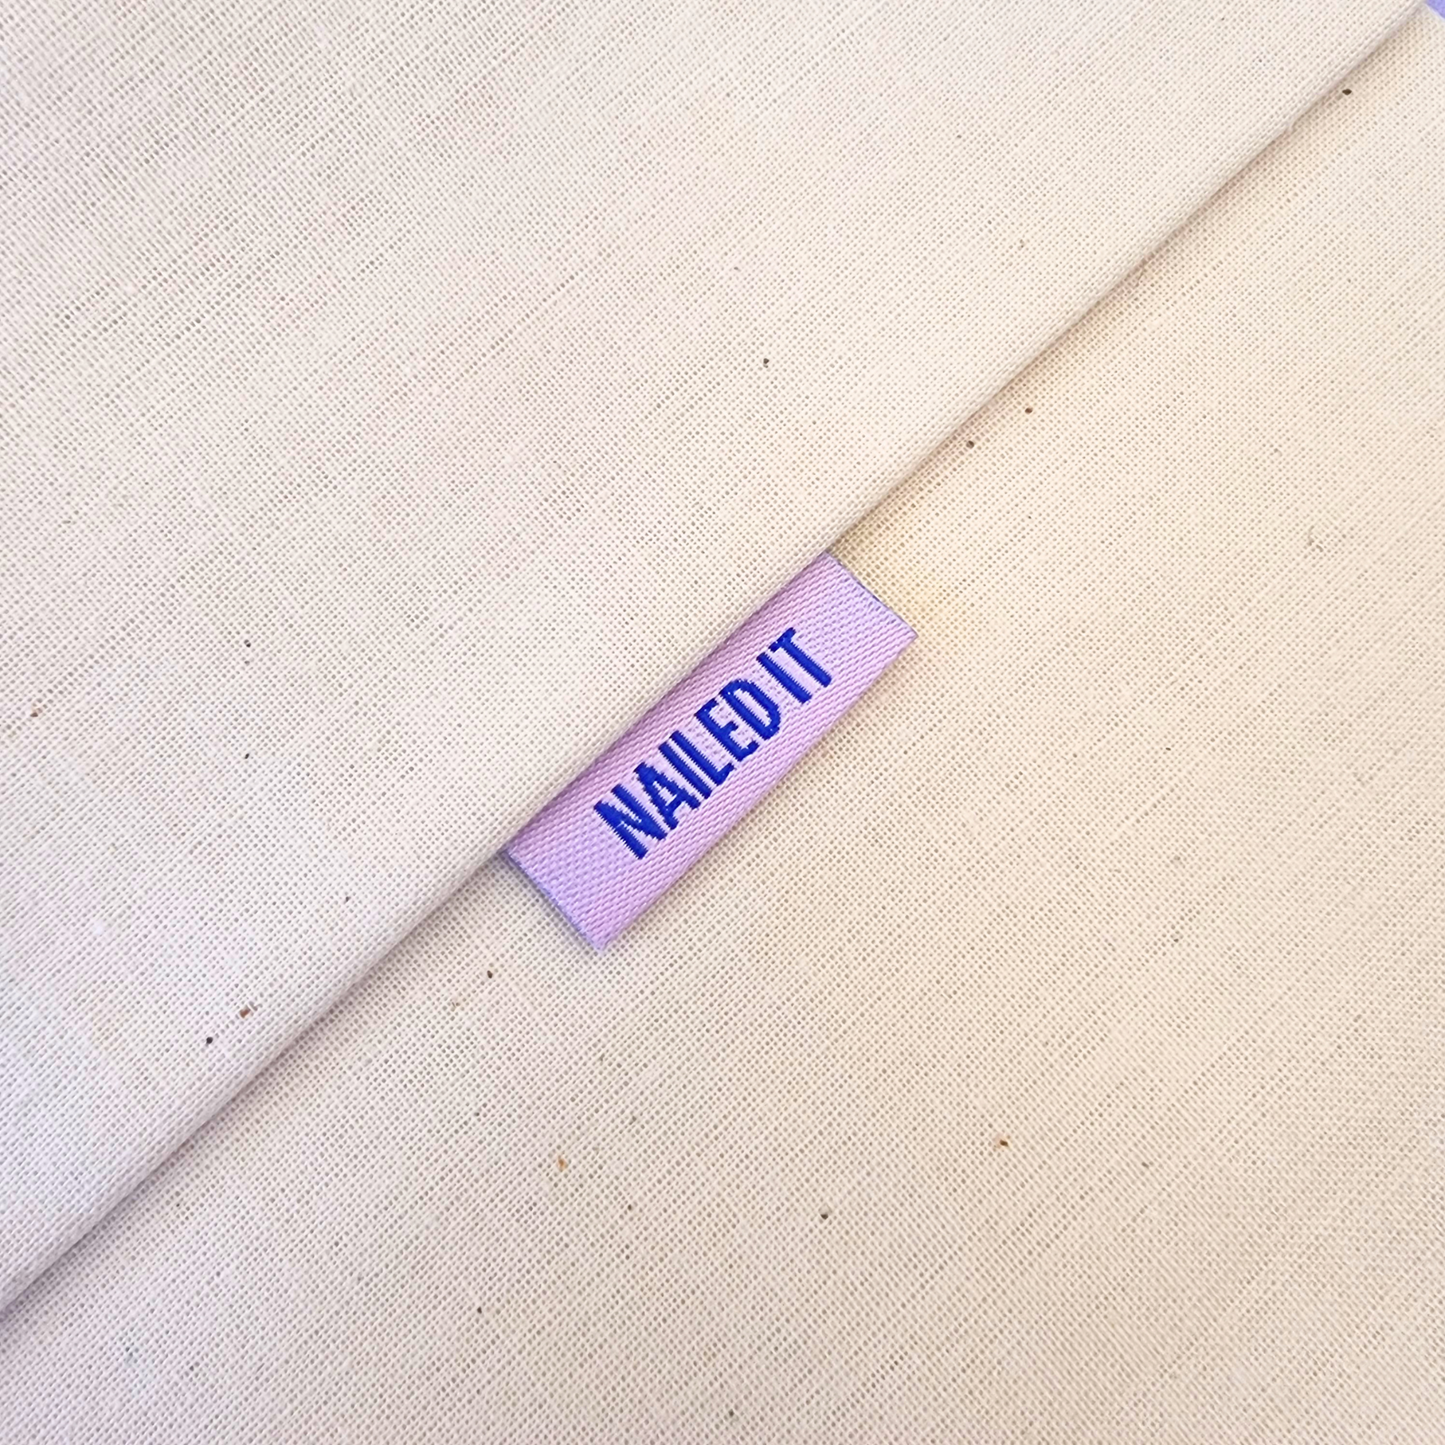 Nailed It | Woven Sew In Labels